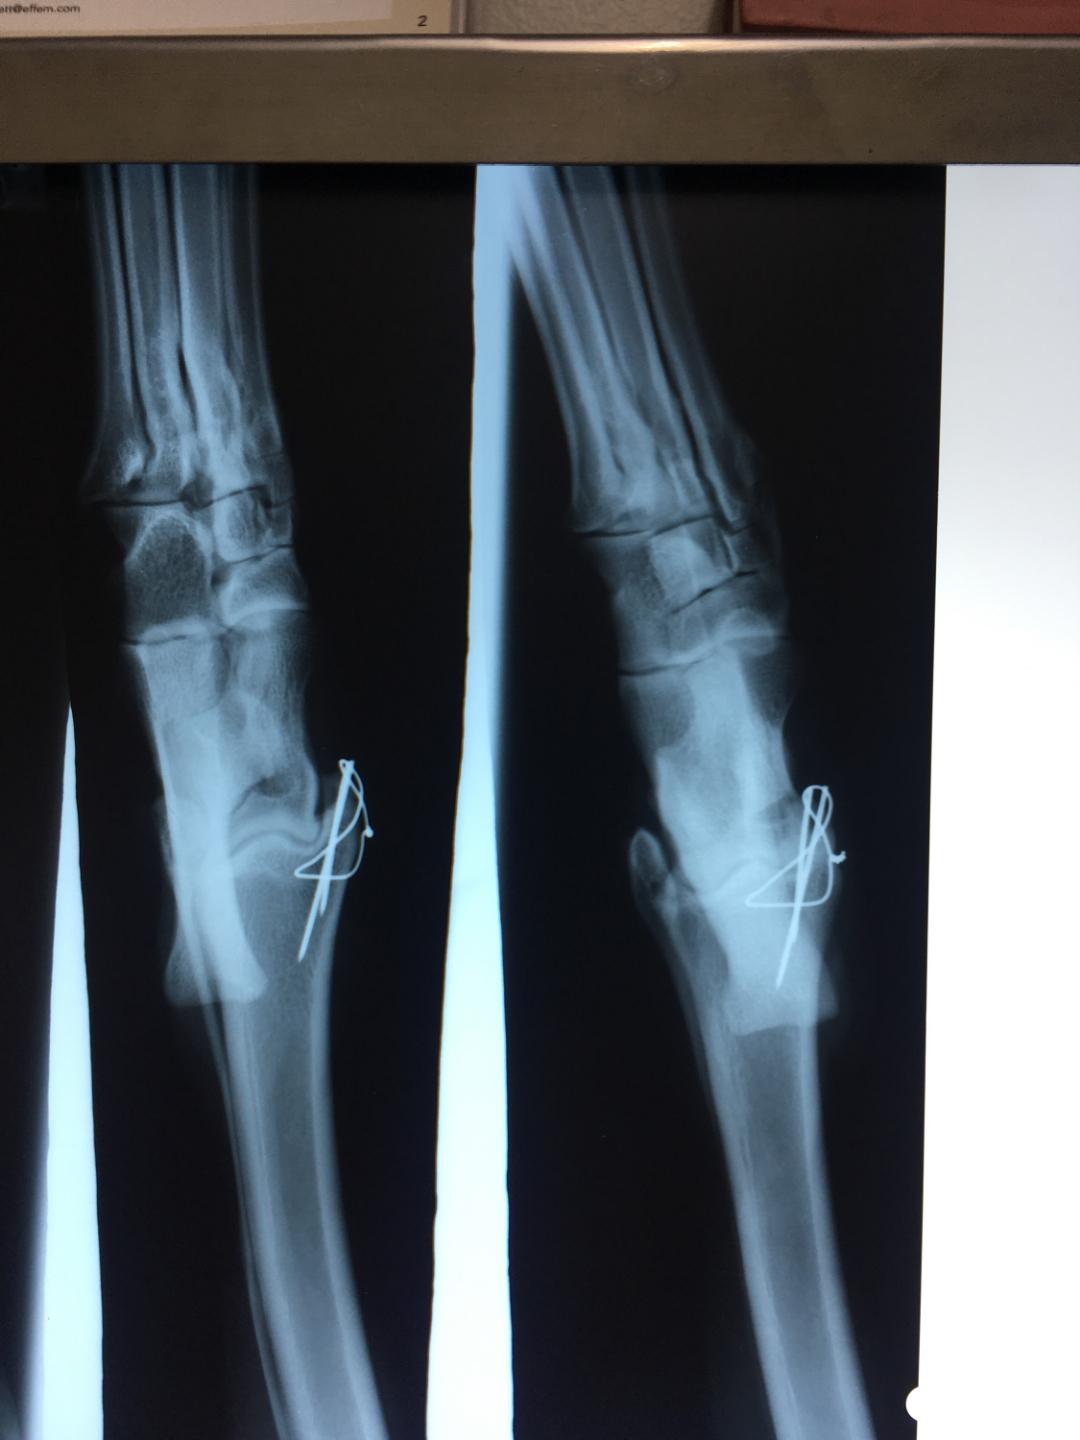 An x-ray of Burnout's injury.